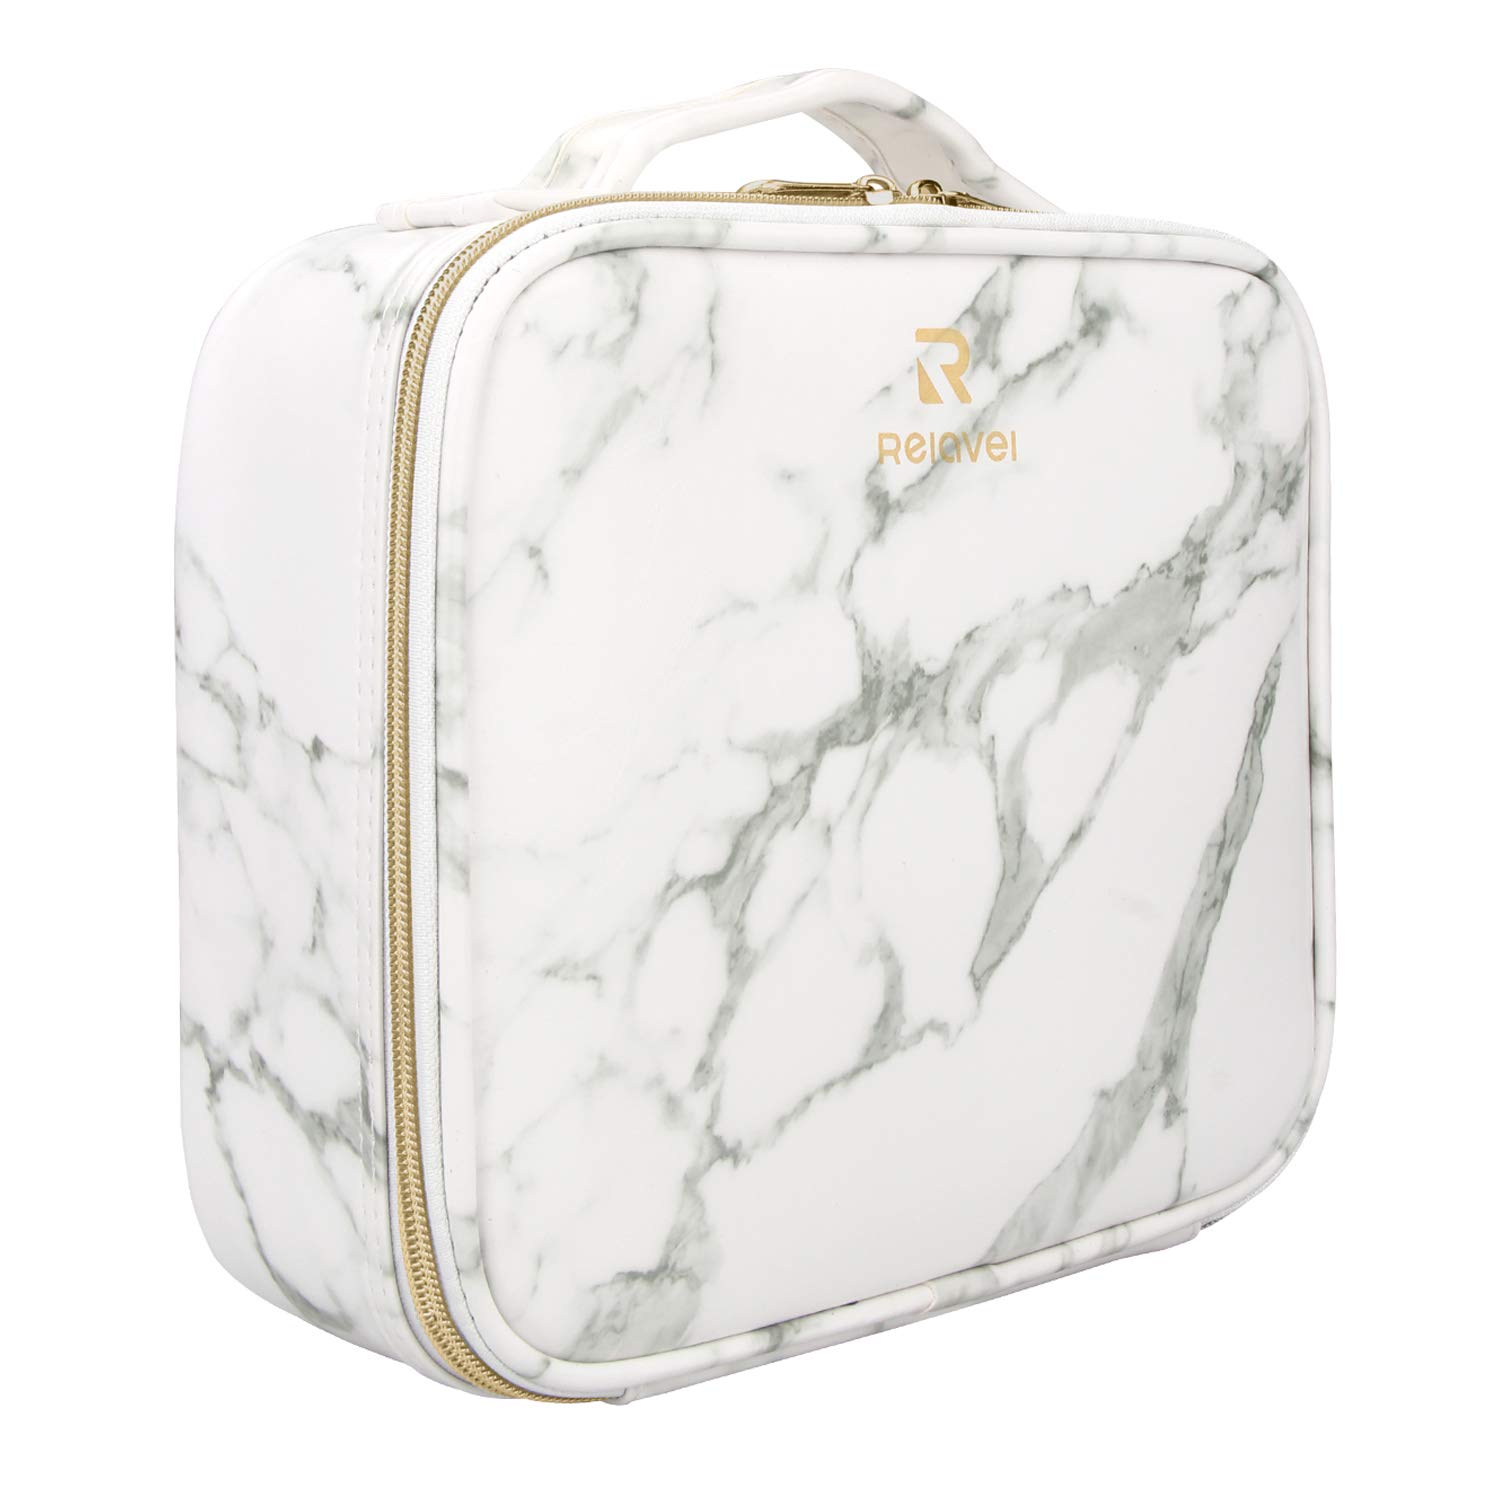 Relavel Marble Makeup Bag Large Makeup Organizer Bag Travel Train Case Portable Cosmetic Artist Storage Bag with Adjustable Dividers for Cosmetics Makeup Brushes (Marble Pattern)